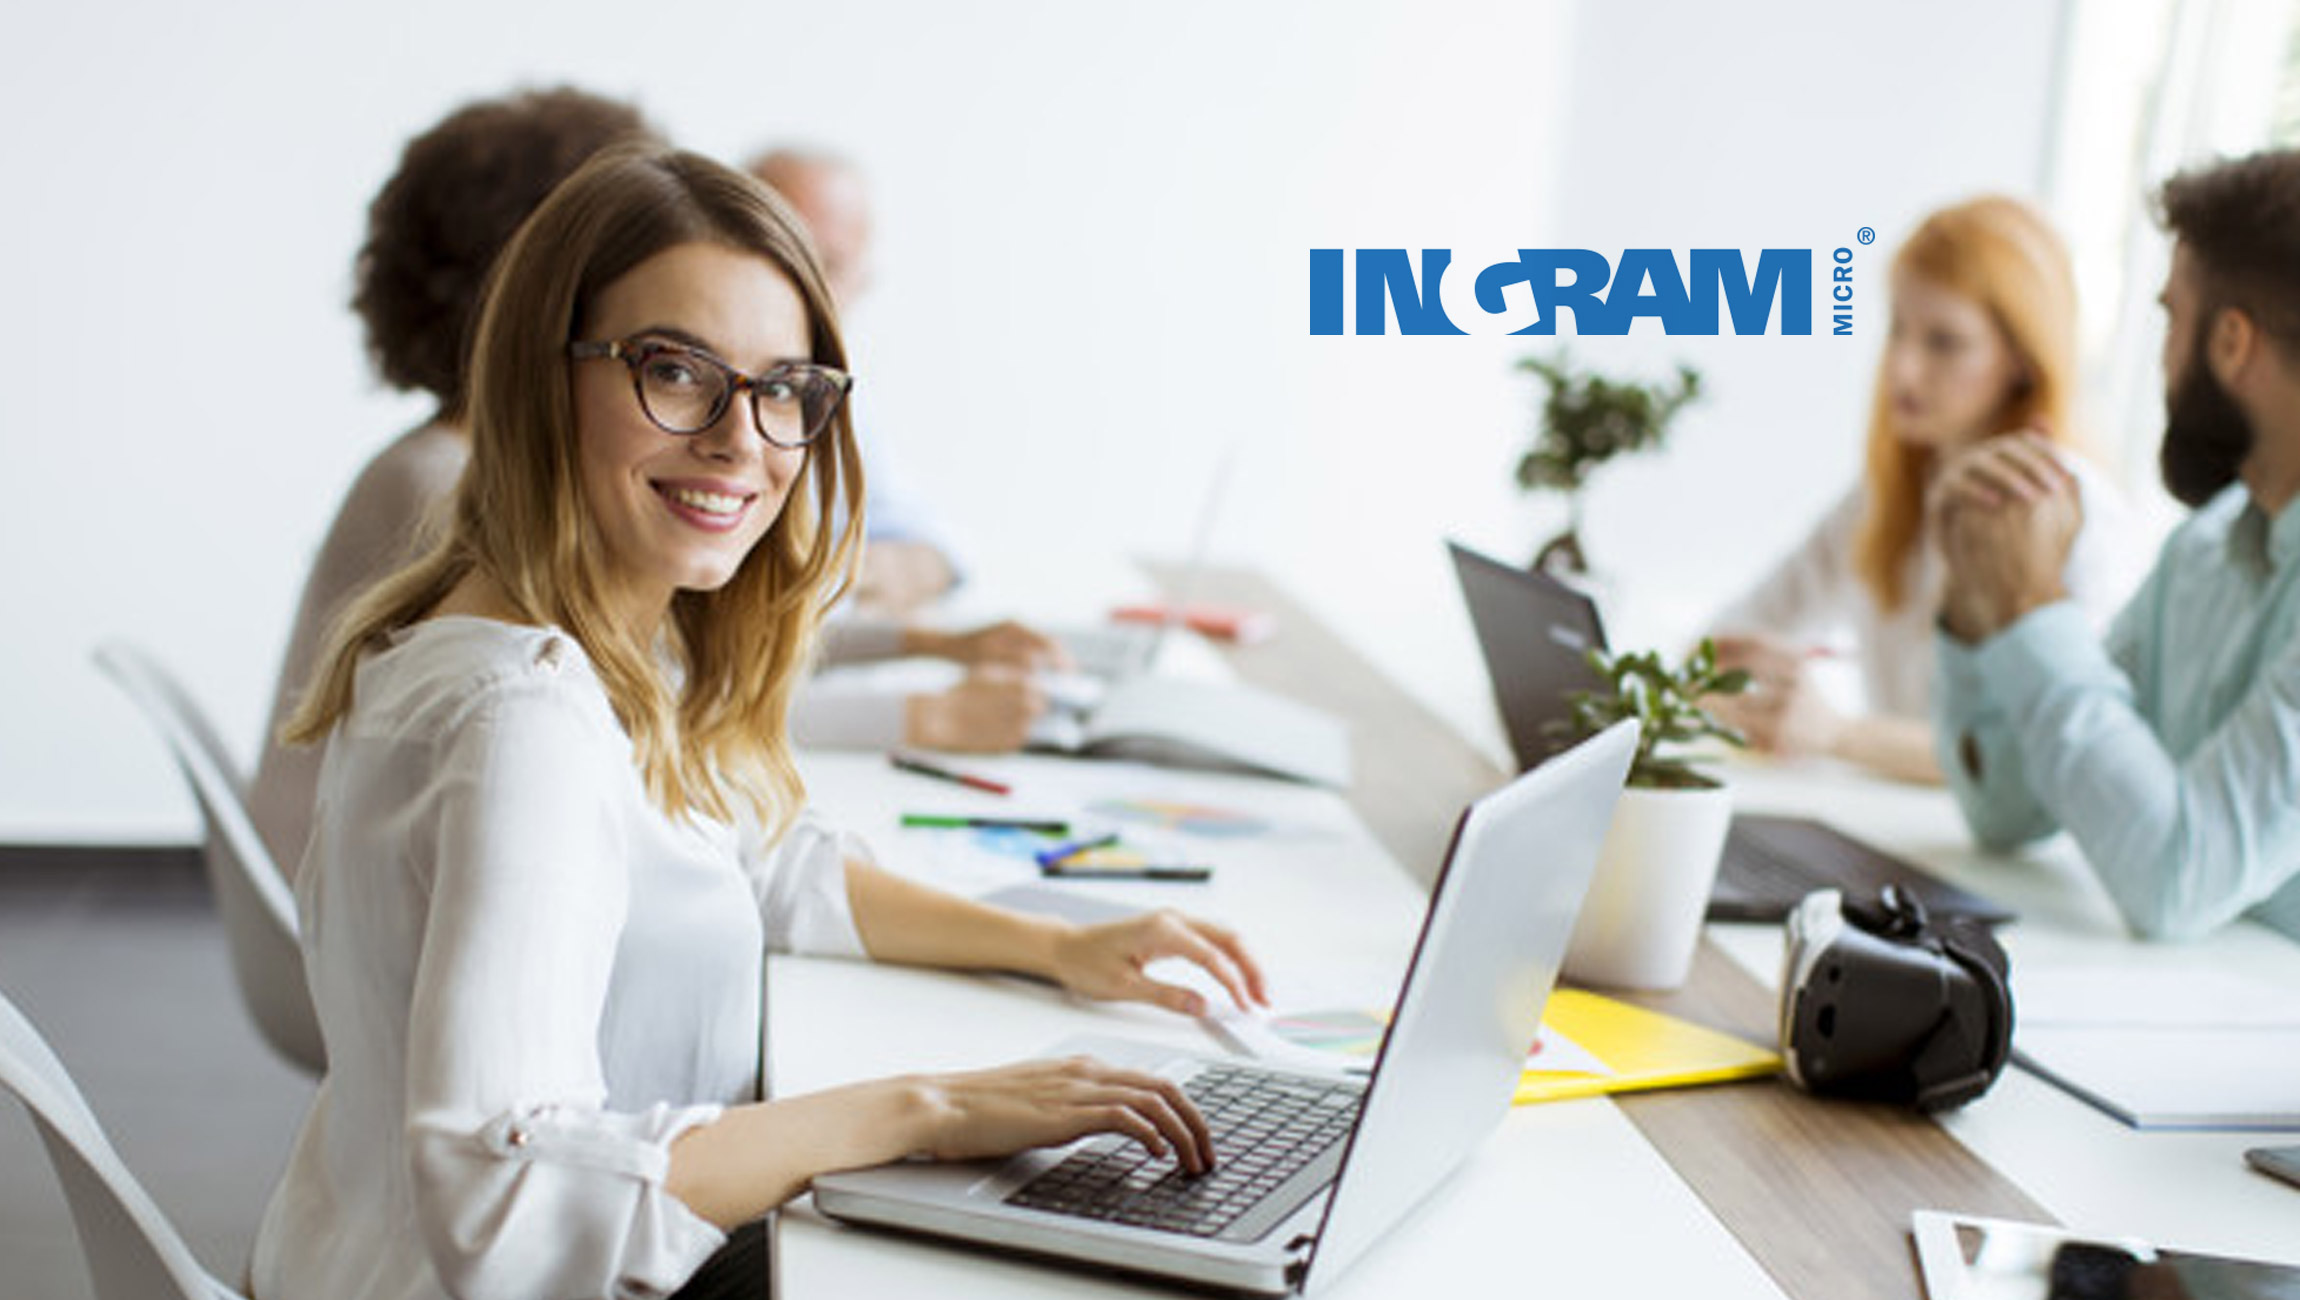 Ingram Micro Achieves AWS Migration Competency Status to Accelerate AWS Growth for Channel Partners